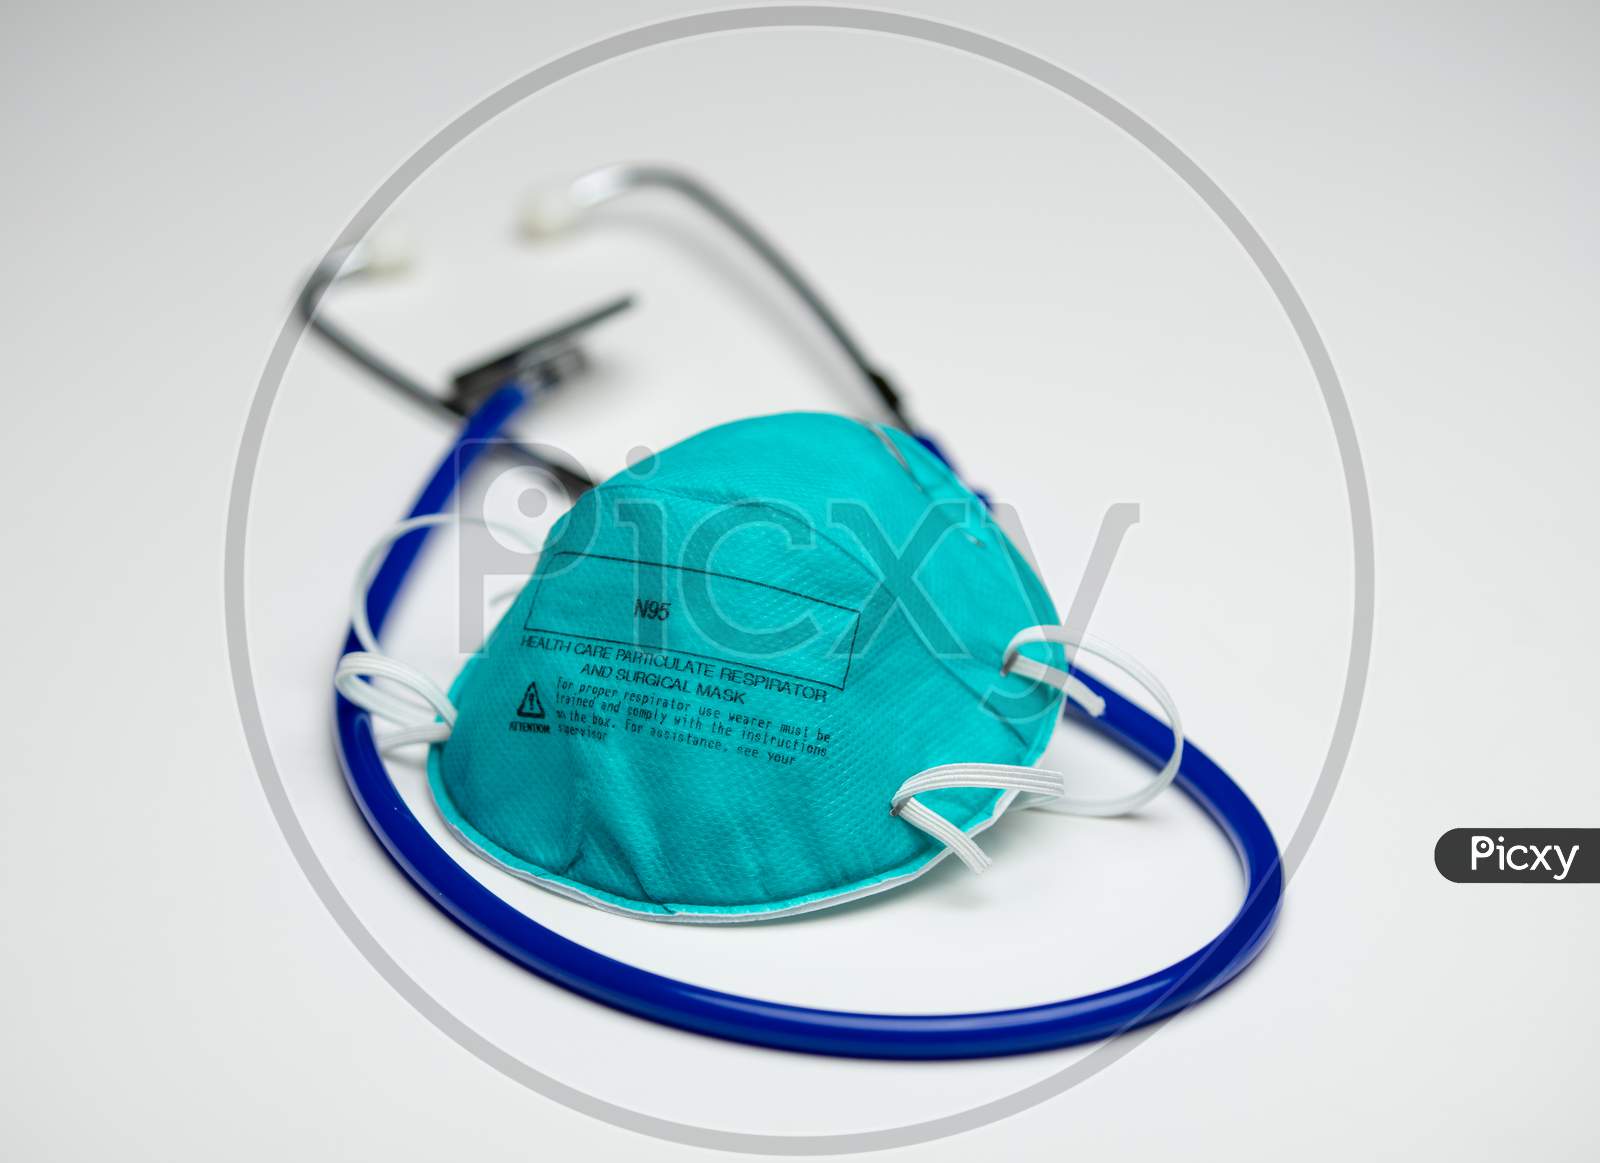 An Single Teal N95 Respirator Mask On Top Of A Blue Medical Stethoscope. Isolated On A White Background.